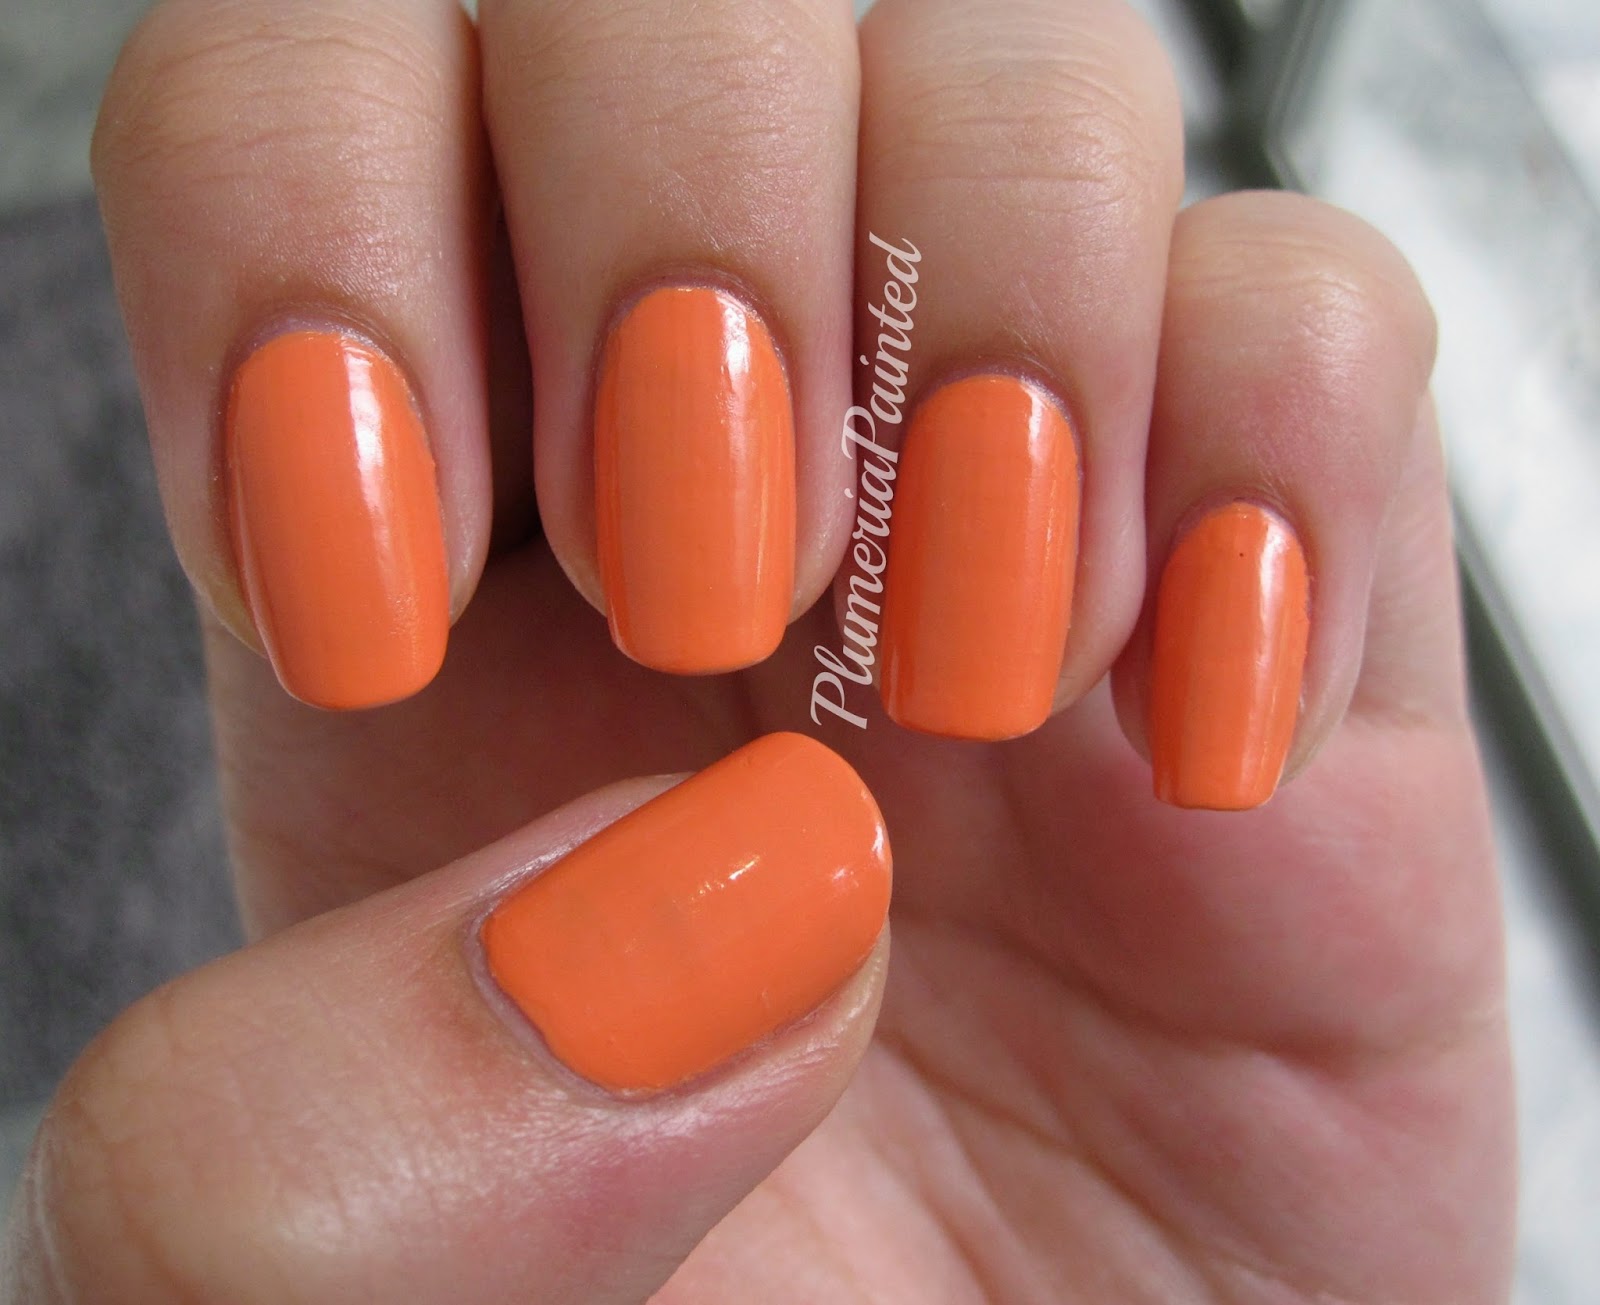 5. The Best Red Orange Nail Polish for Light Skin - wide 7